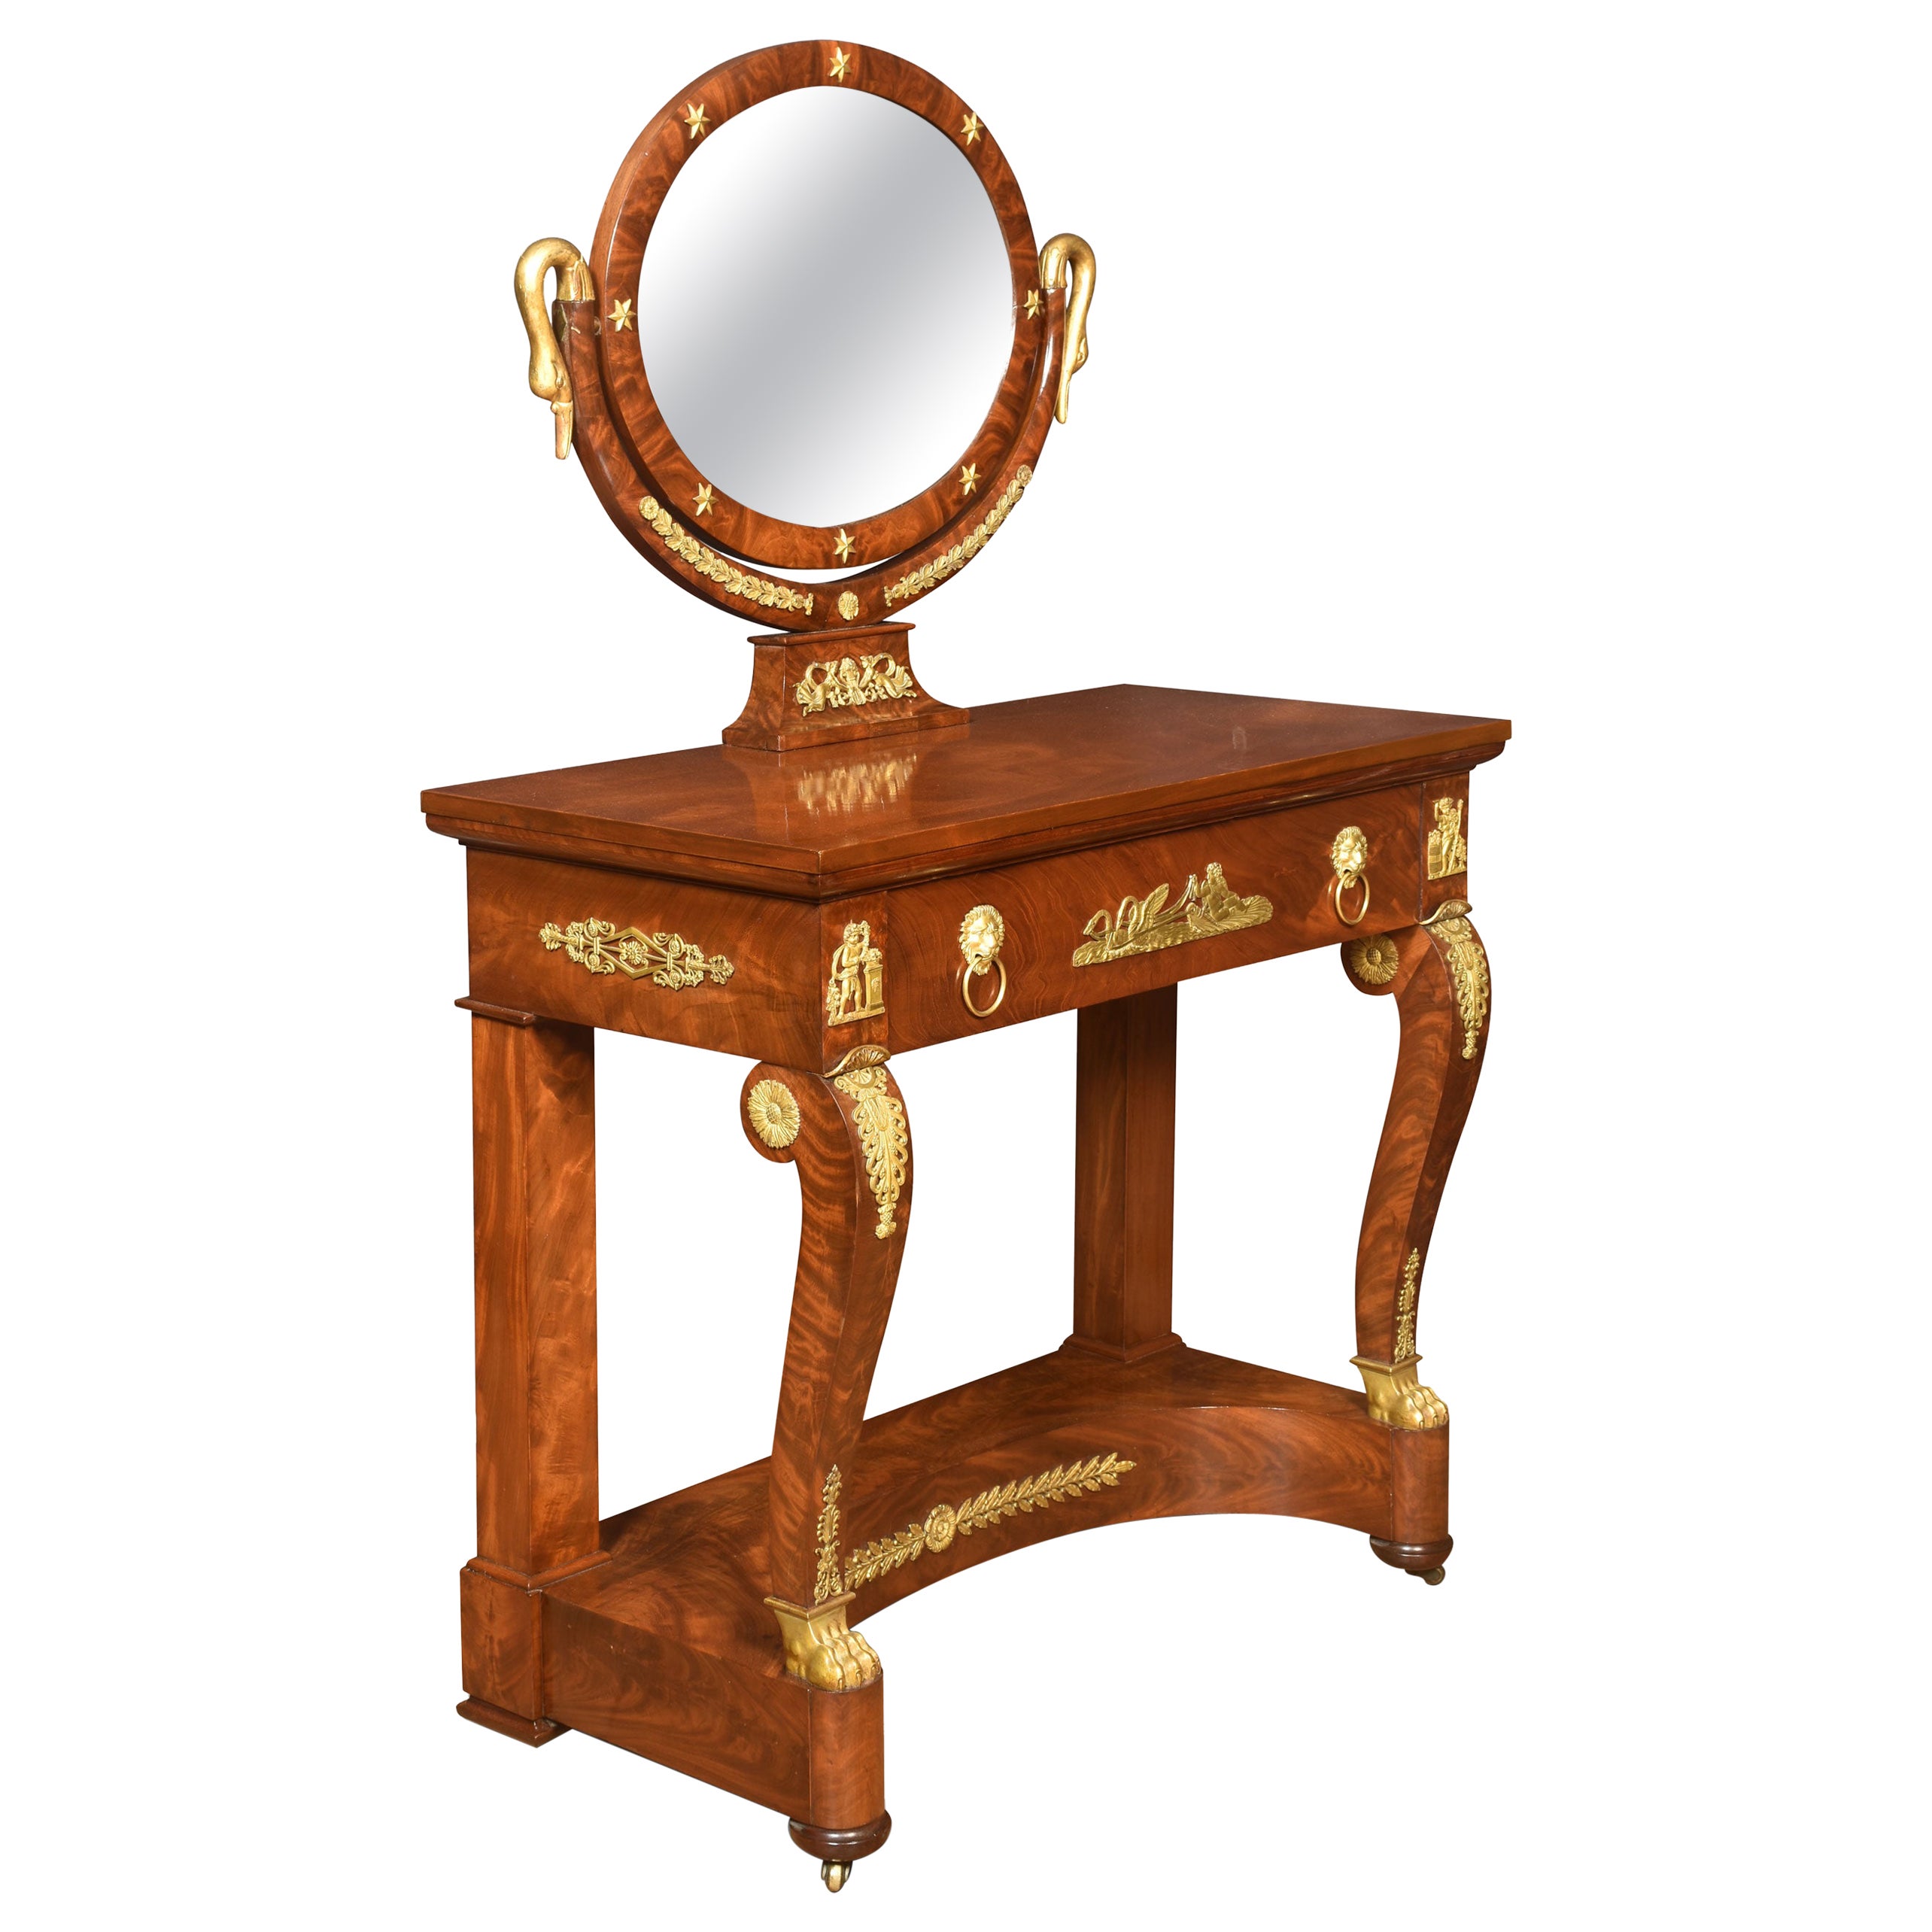 19th century French Empire dressing table